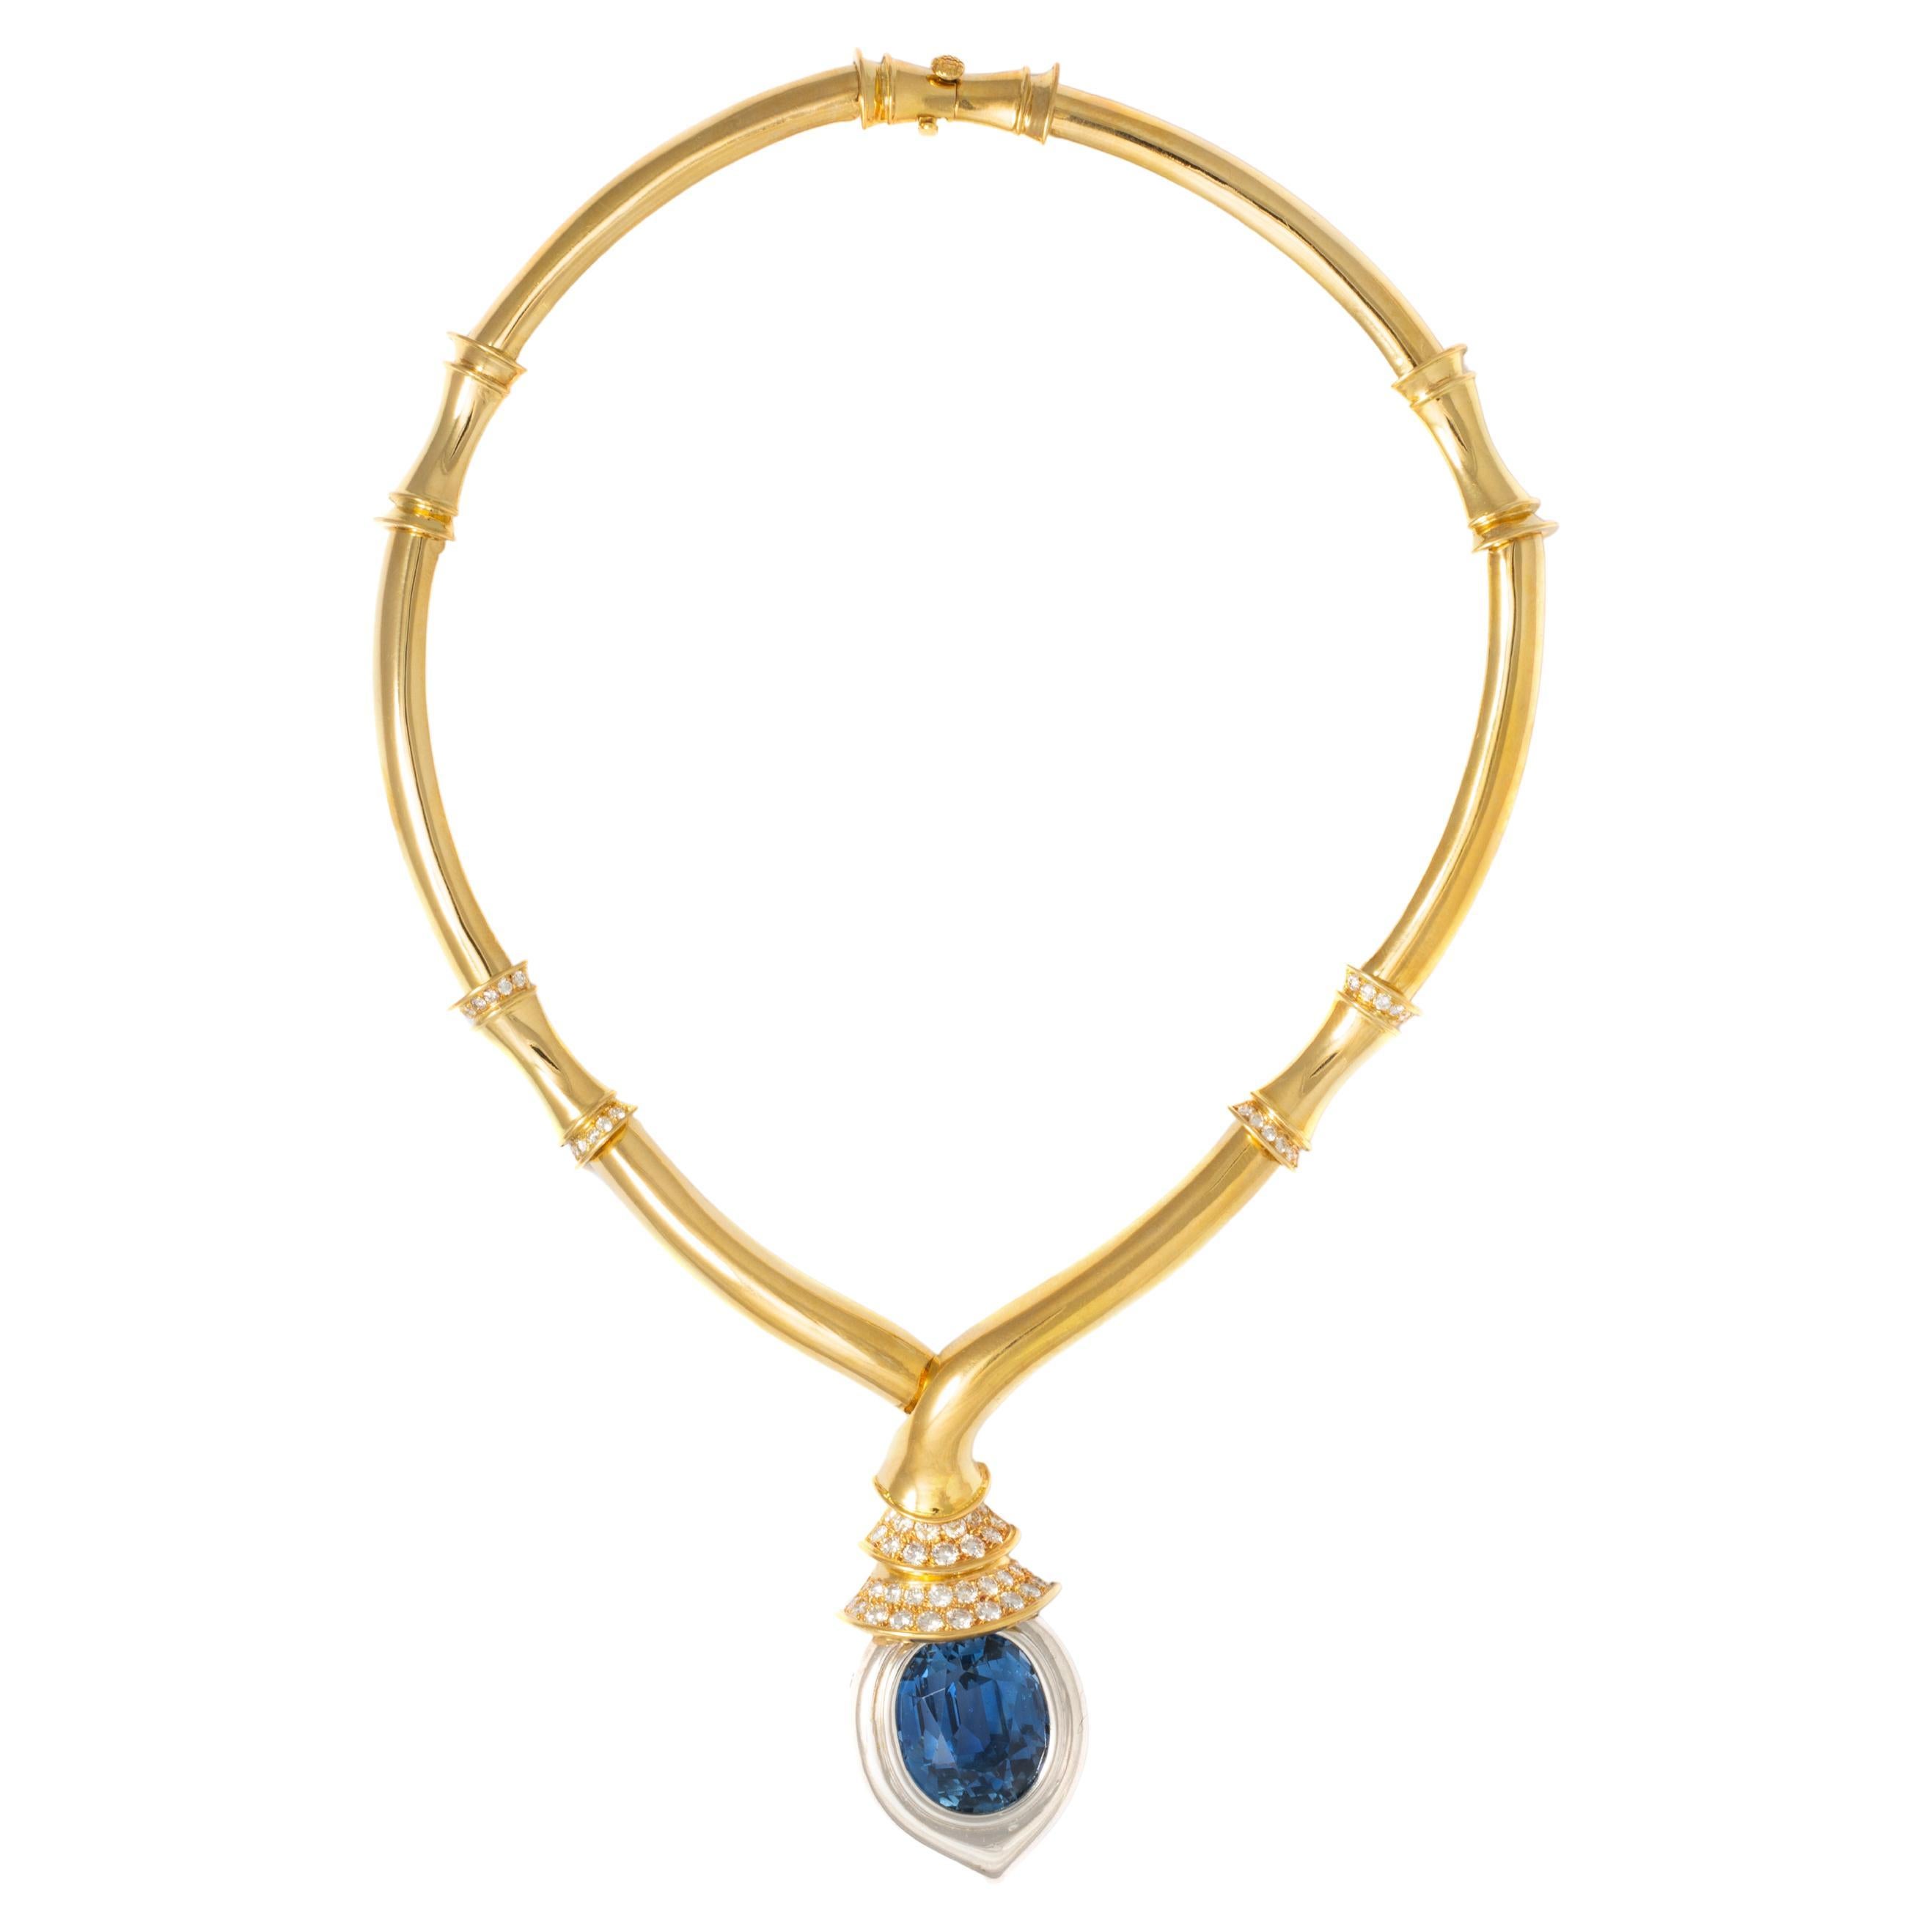 48.83 Carat Sapphire Bamboo Necklace